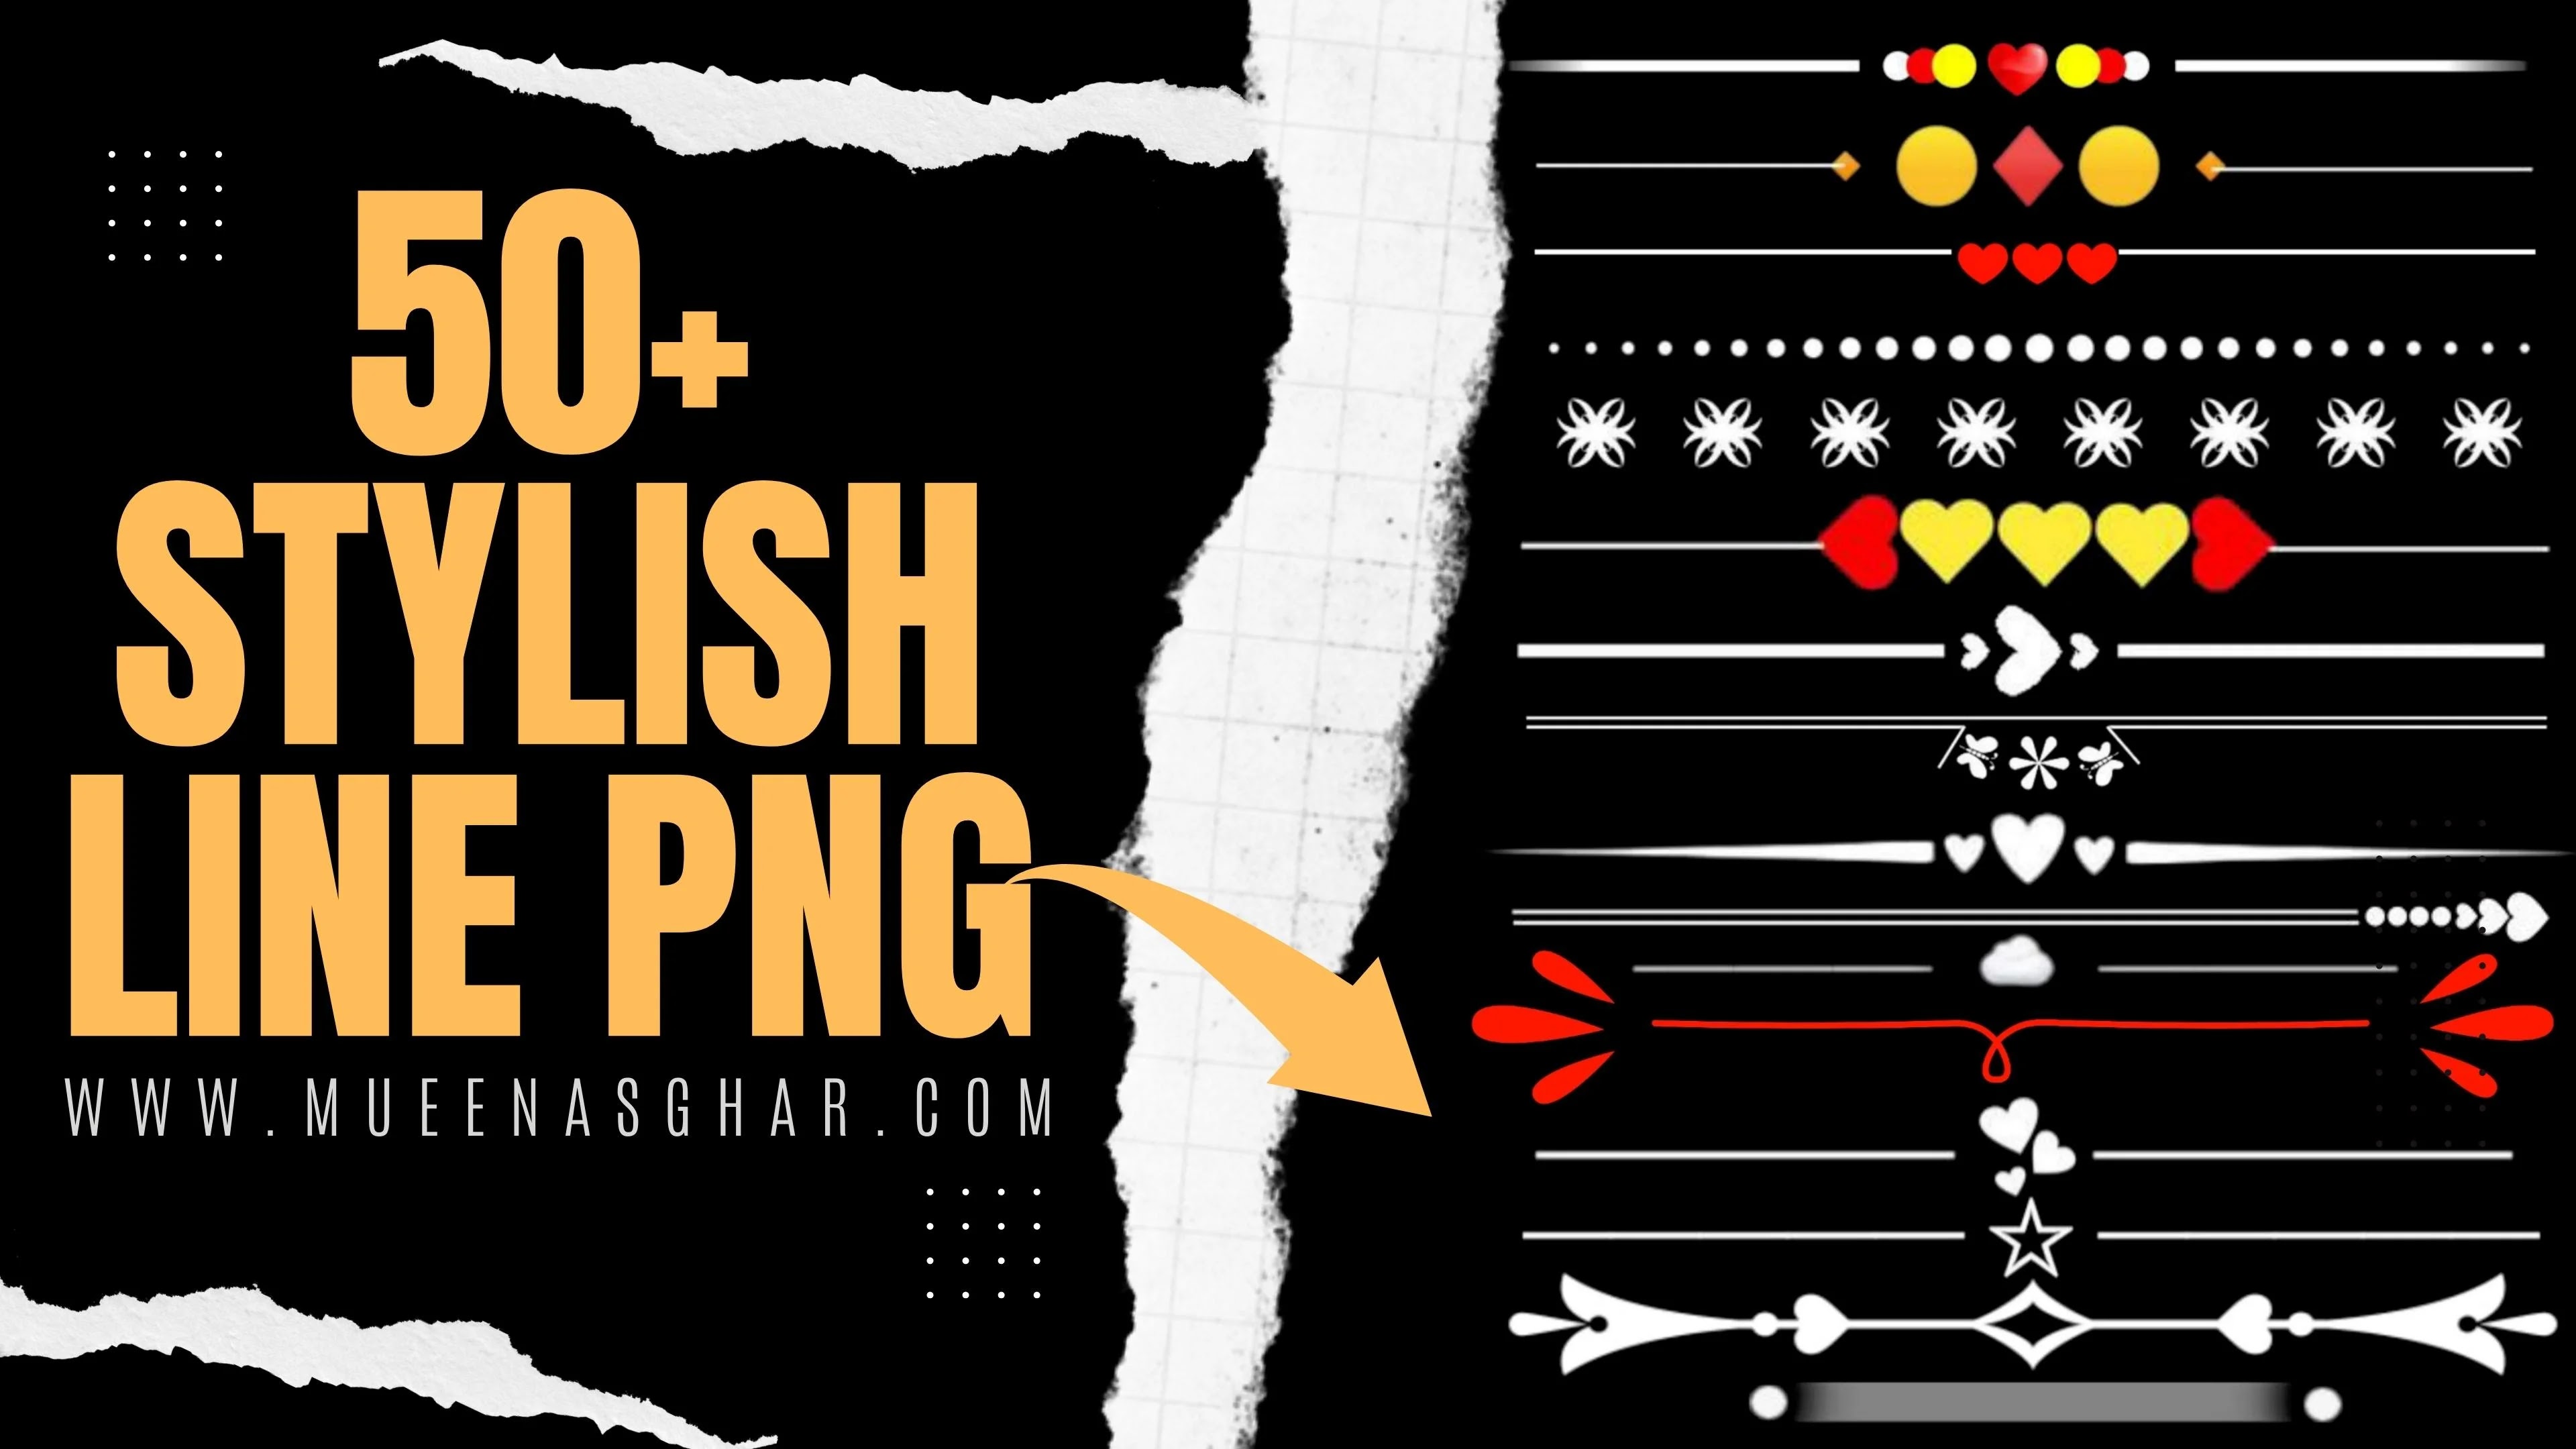 50+ Stylish Line PNG for Kinemaster - Best of status Png download Free